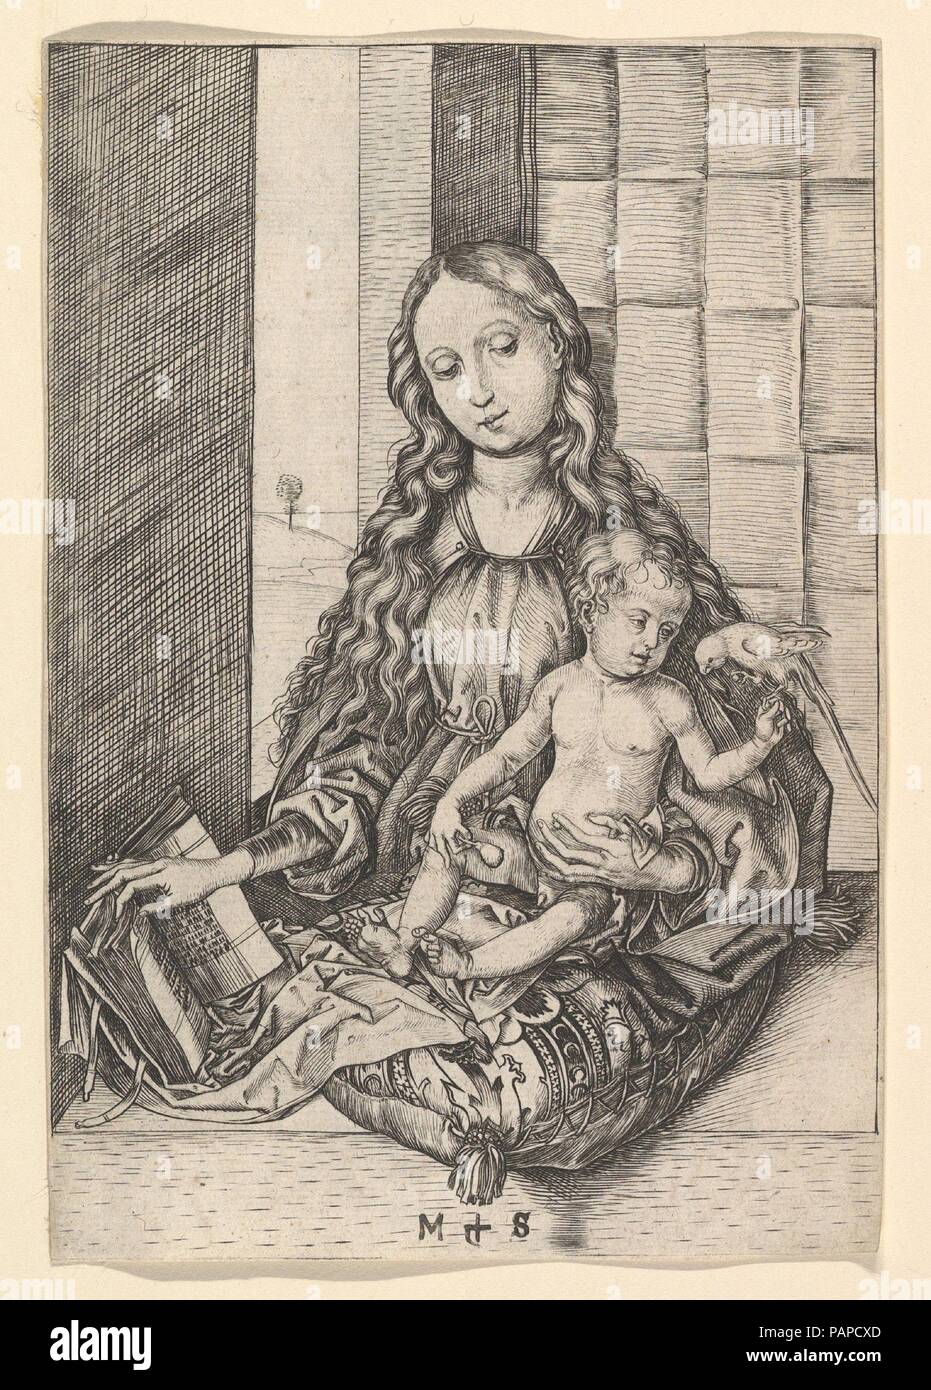 The Madonna and Child with the Parrot. Artist: Martin Schongauer (German, Colmar ca. 1435/50-1491 Breisach). Date: 15th century. Museum: Metropolitan Museum of Art, New York, USA. Stock Photo